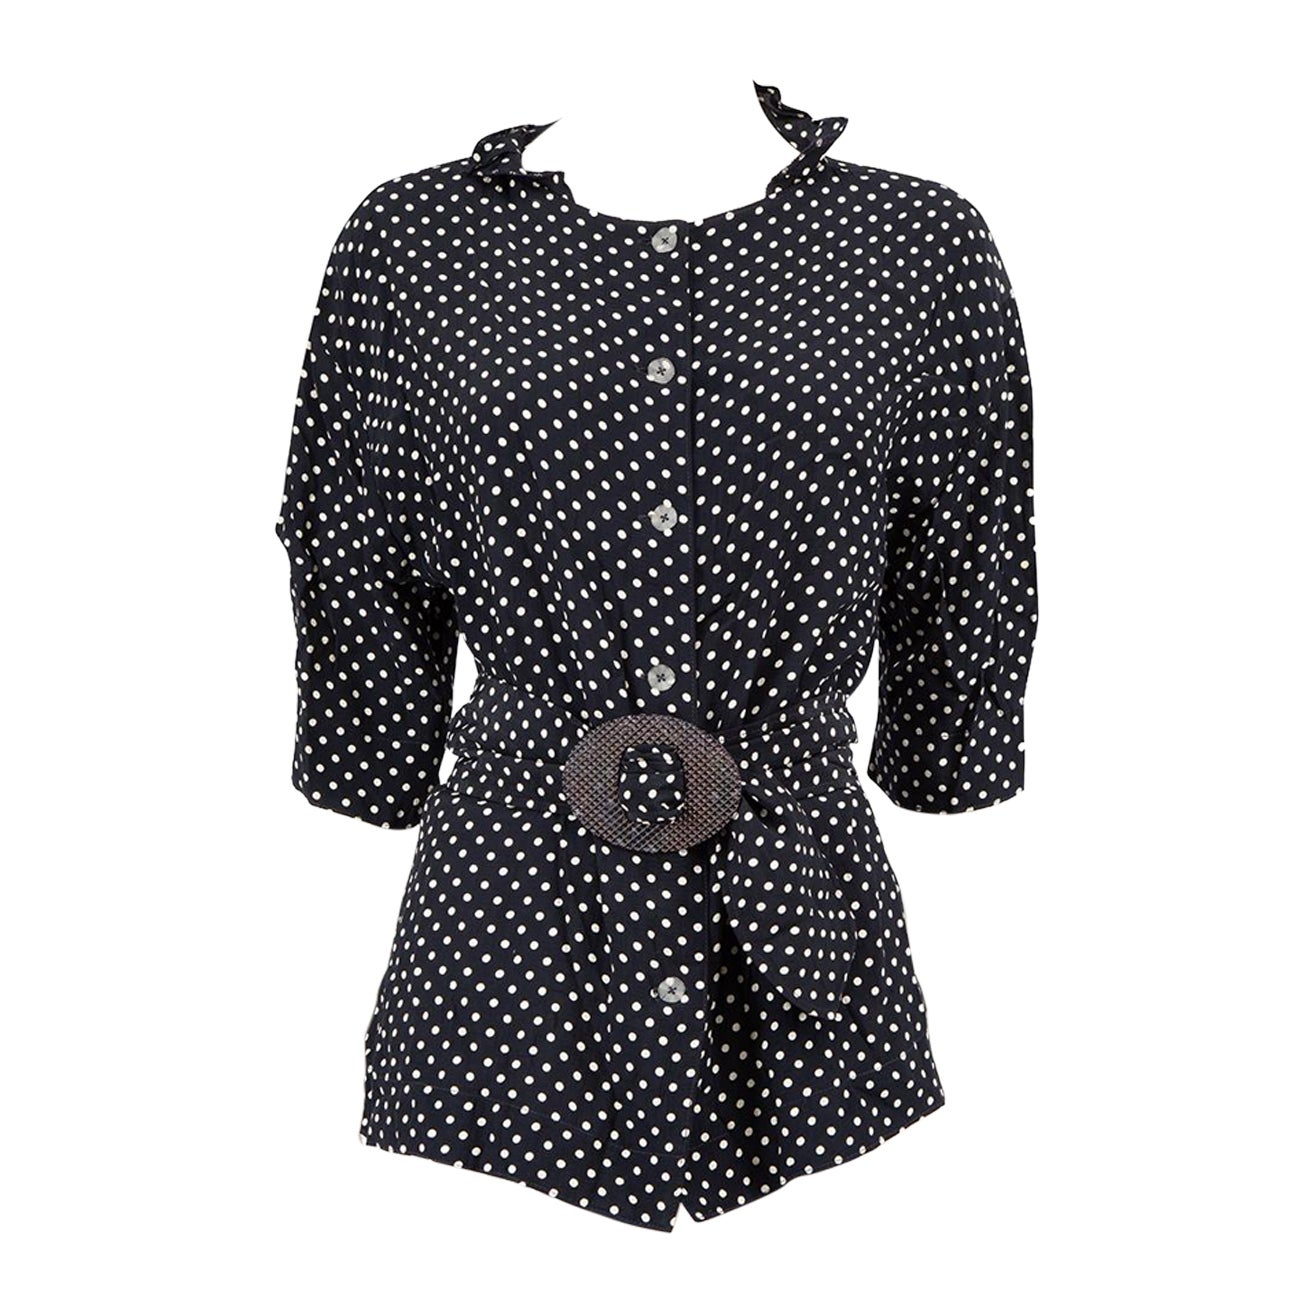 Jean Muir Navy Polka Dot With Bow Shirt Size M For Sale